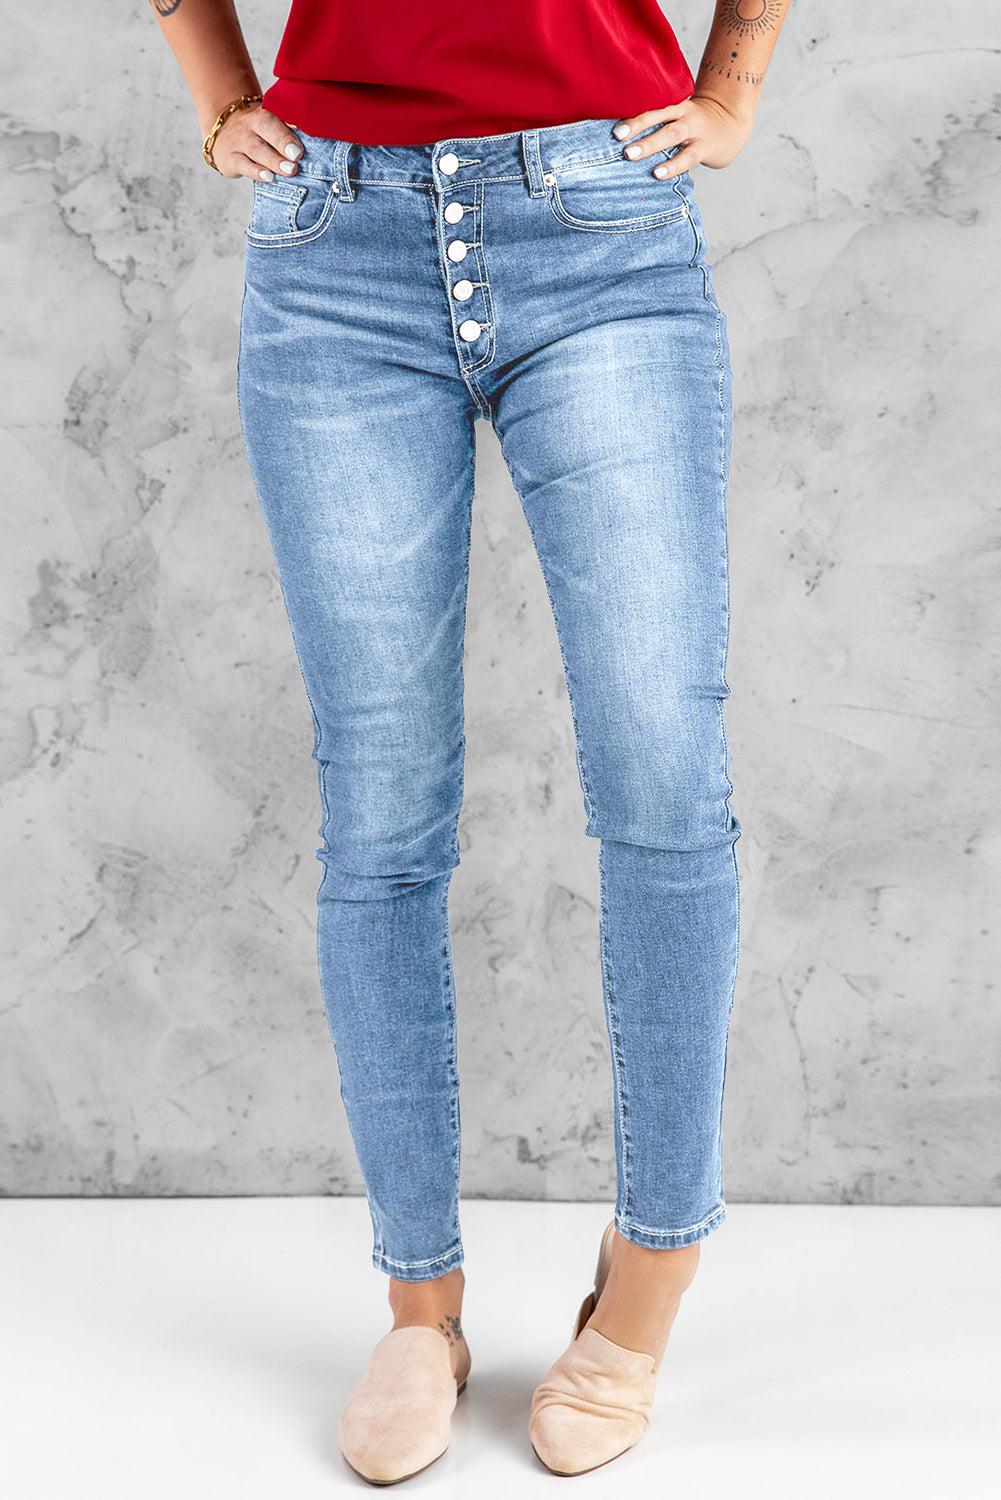 What You Want Button Fly Pocket Jeans-JEANS 0-16-[Adult]-[Female]-Light-S-2022 Online Blue Zone Planet